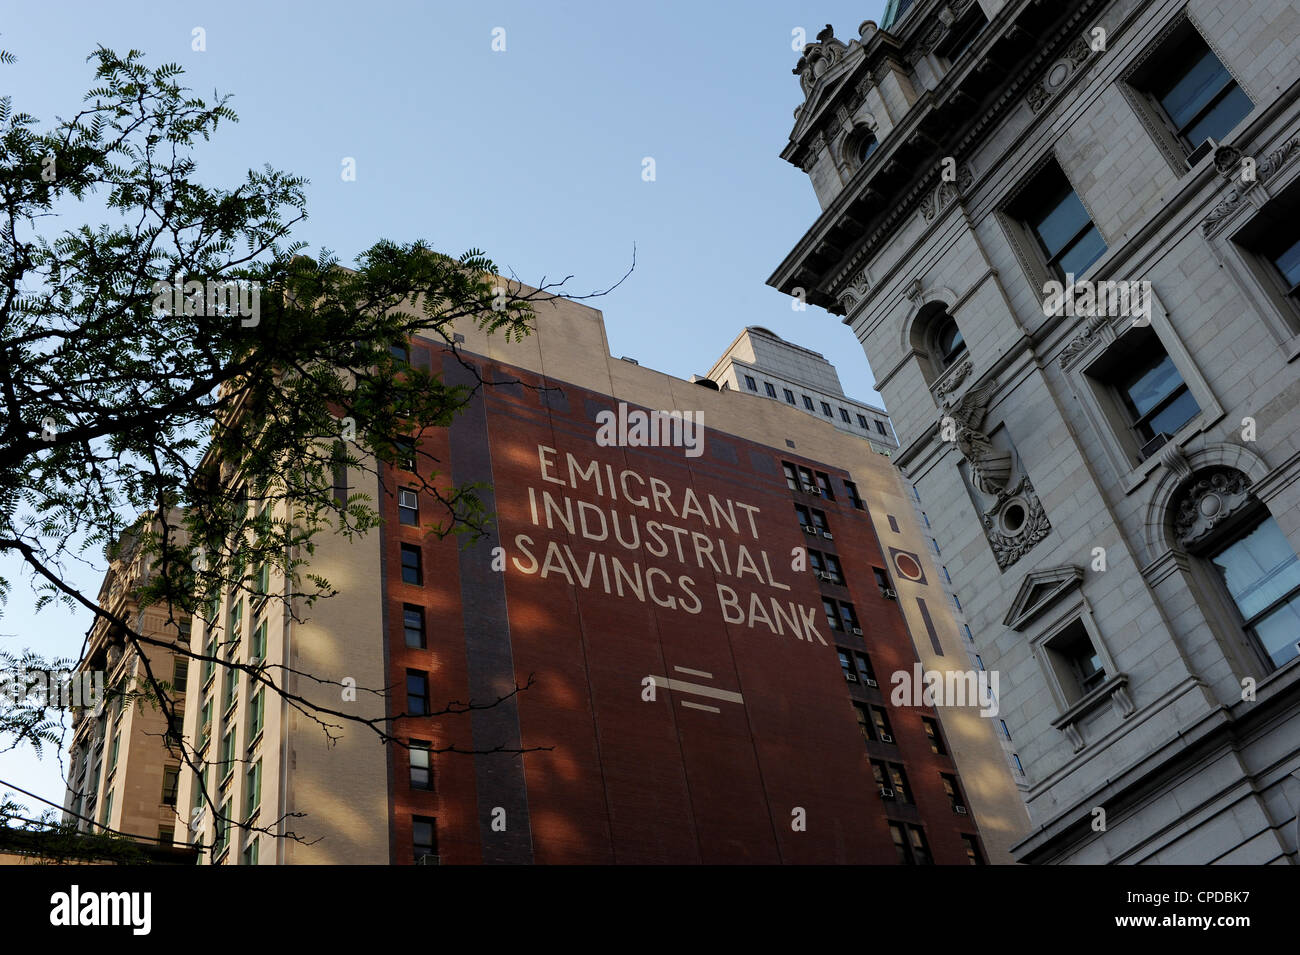 Former headquarters of The Emigrant Industrial Savings Bank, New York Stock Photo